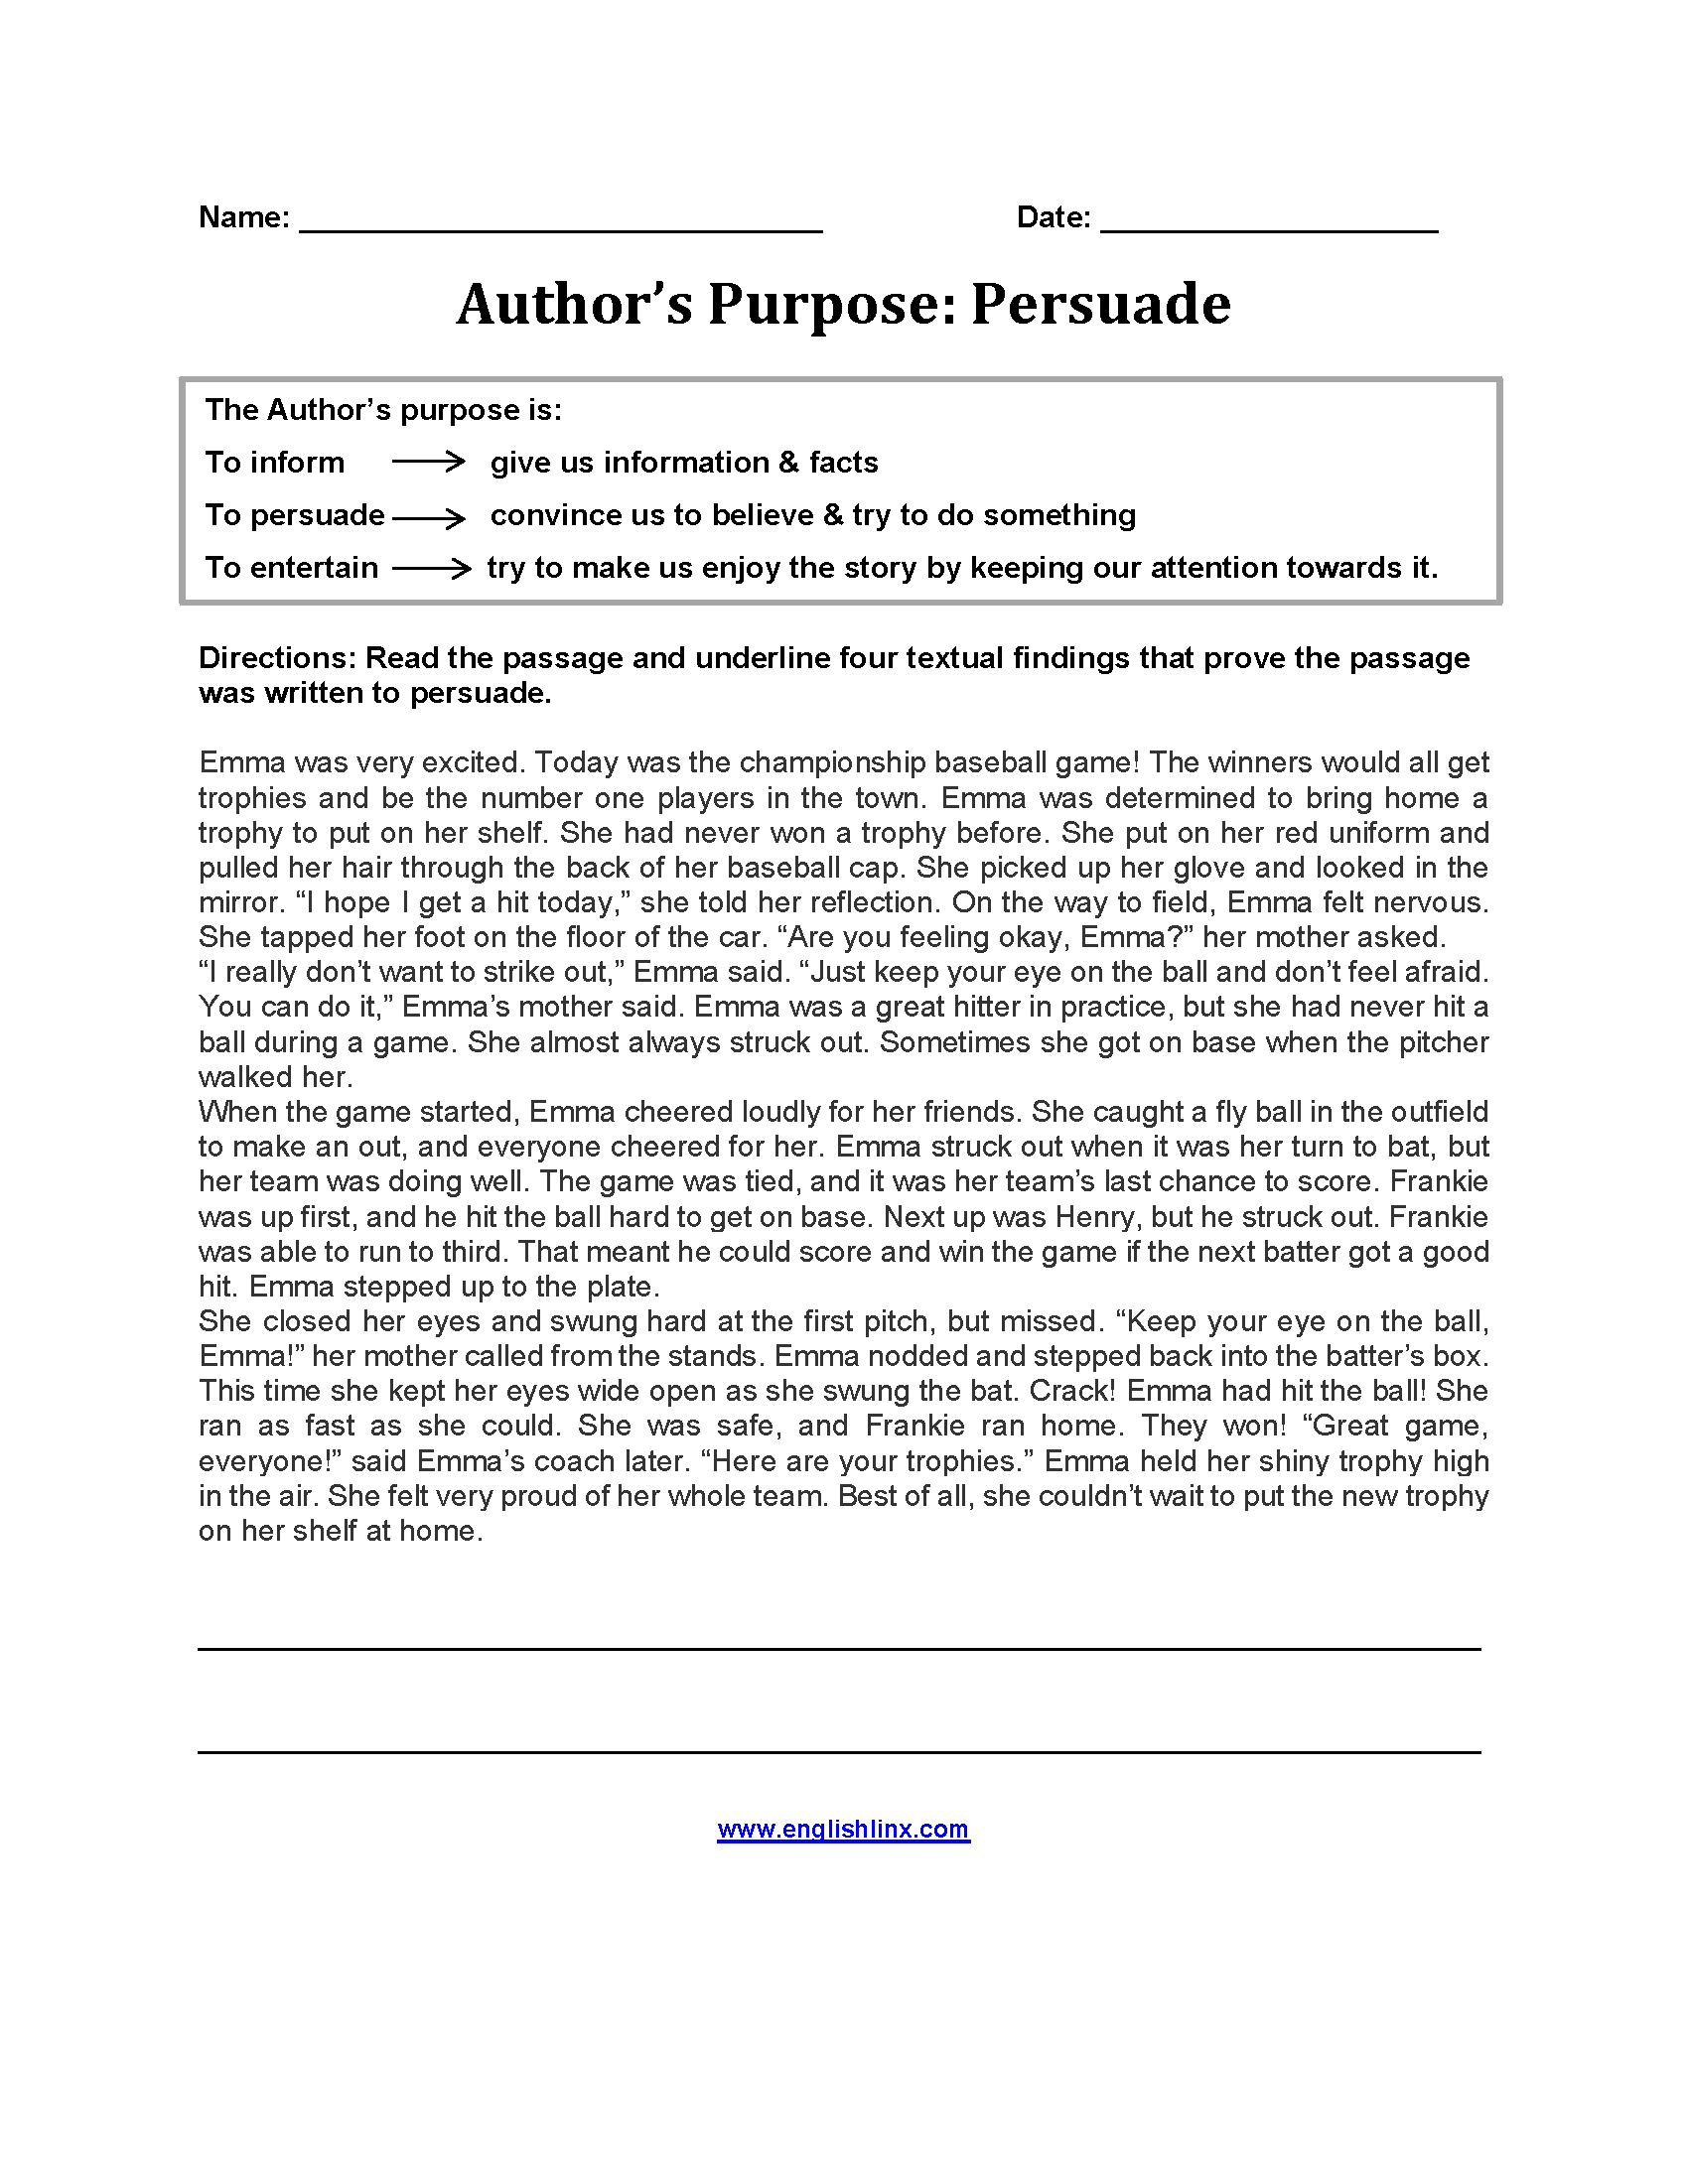 Persuade Author's Purpose Worksheets